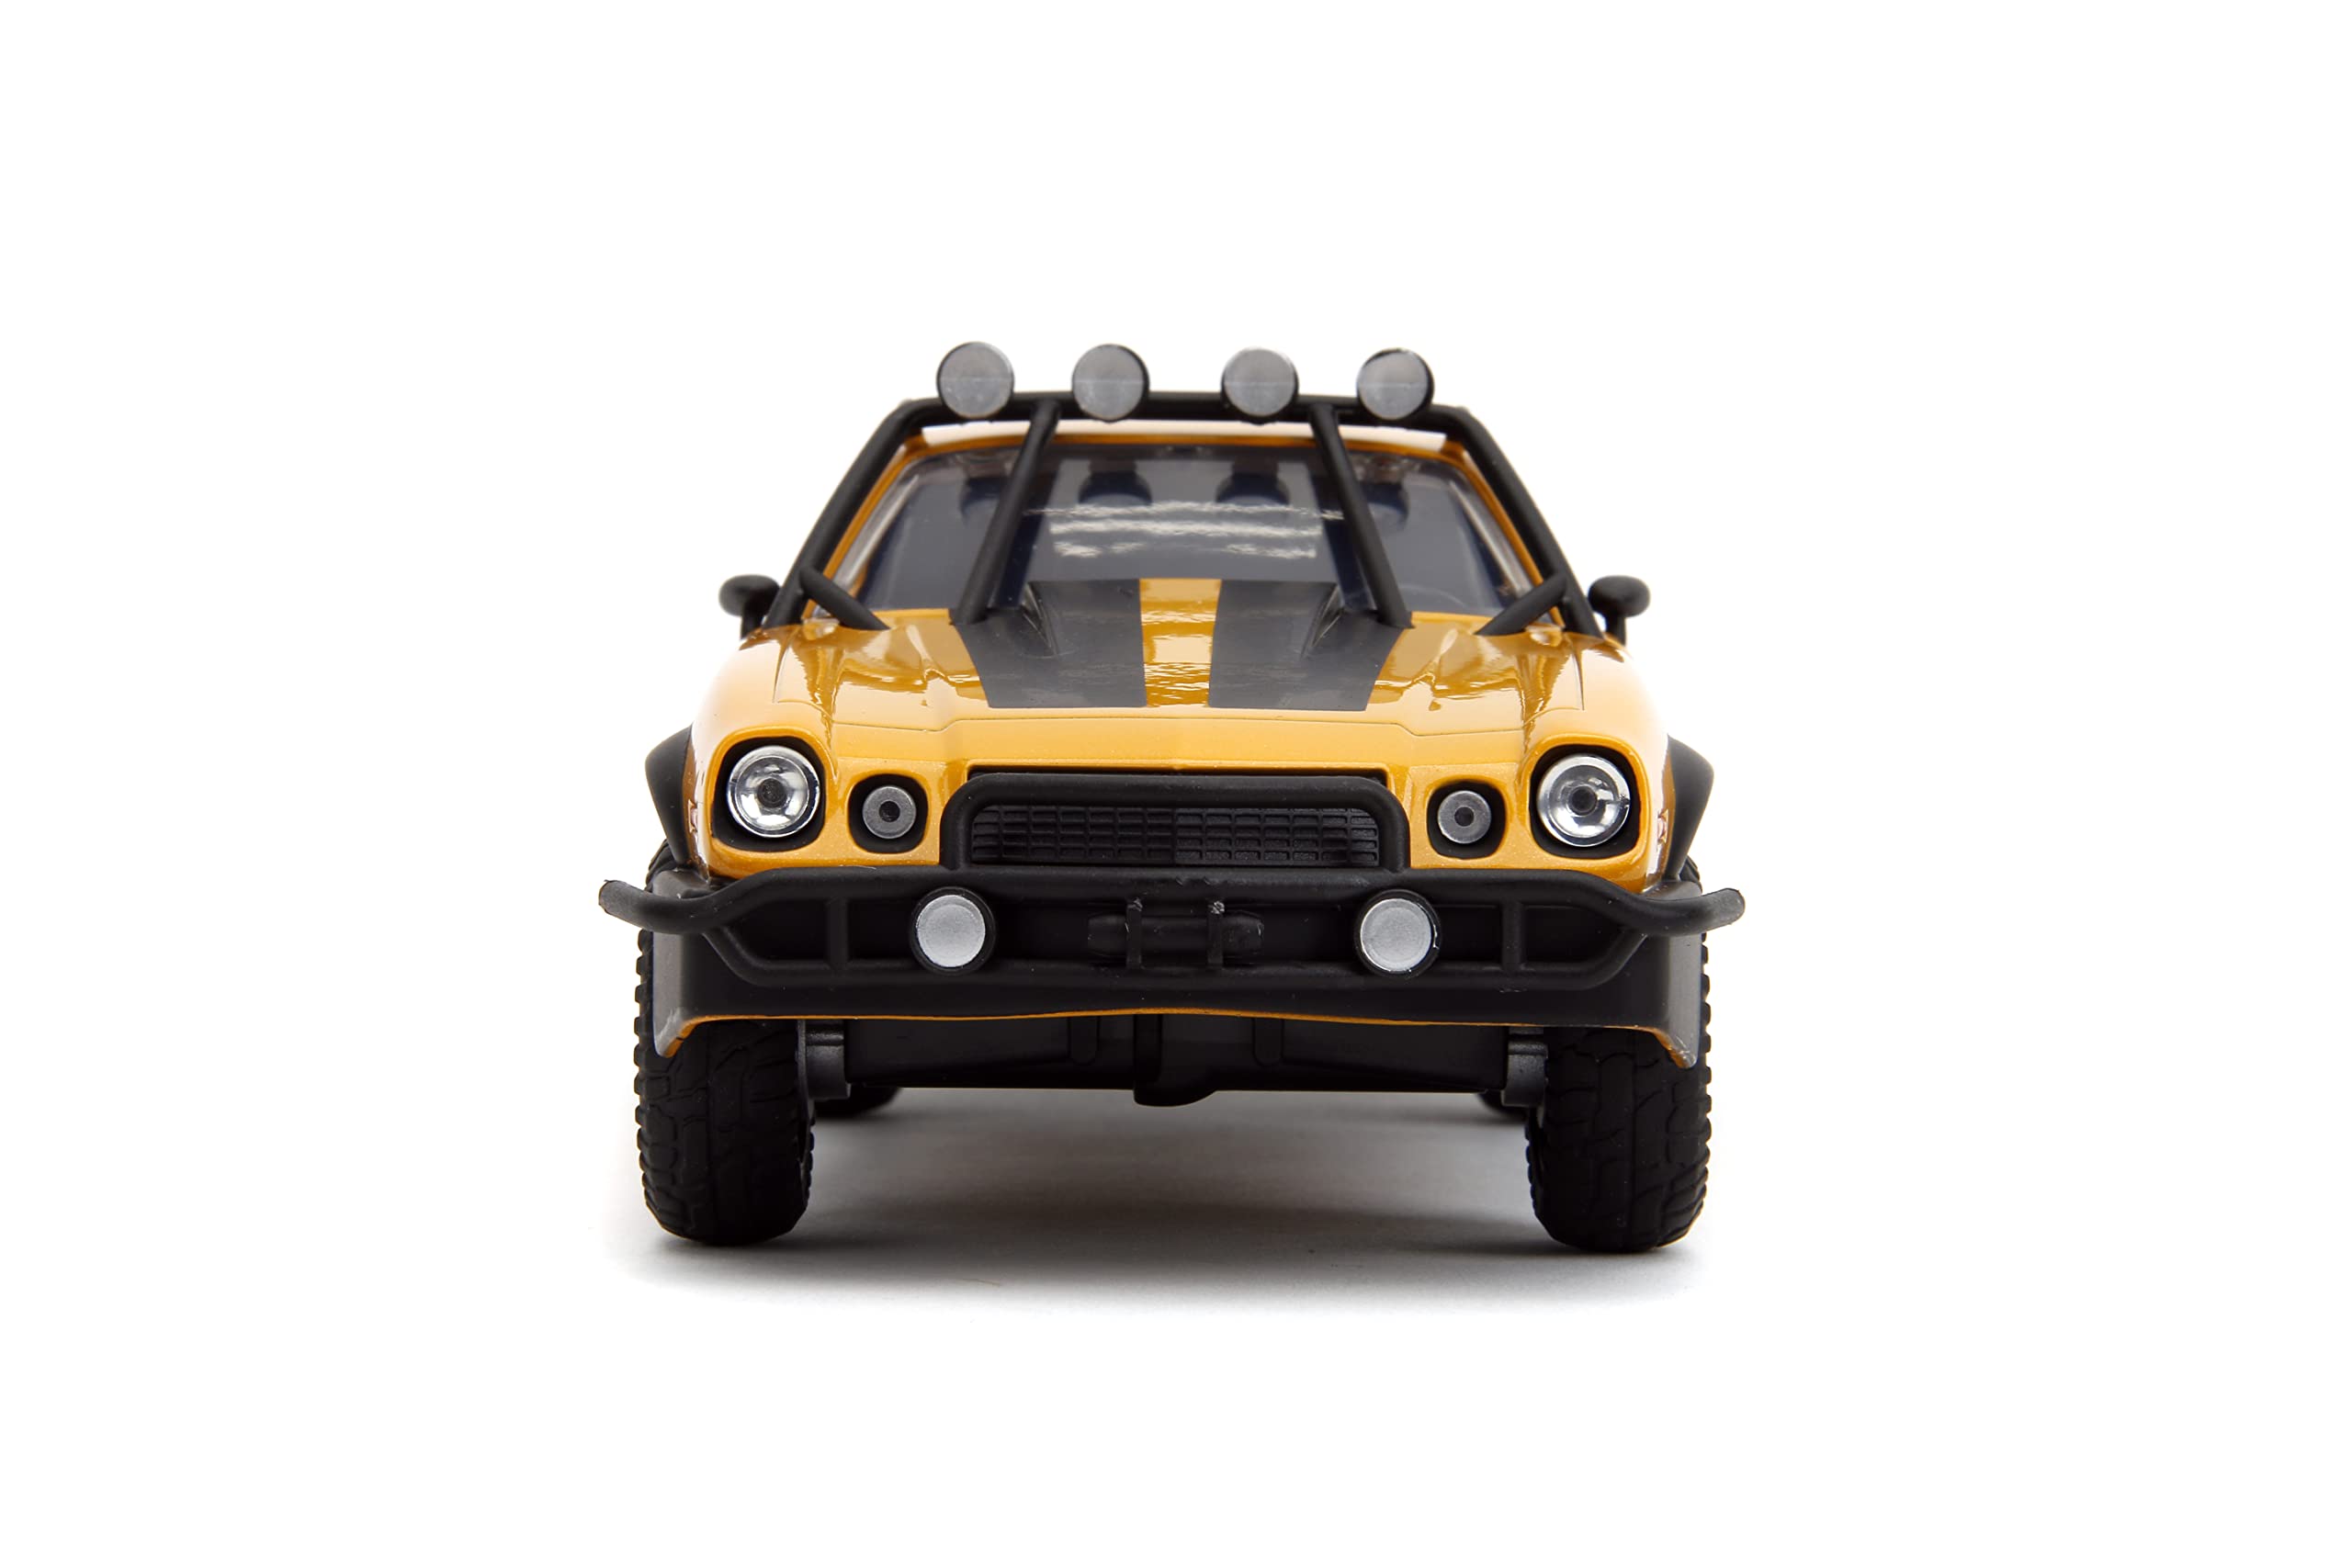 Transformers Rise of The Beast 1:24 1977 Chevy Camaro Bumblebee & Badge Die-Cast Car, Toys for Kids and Adults